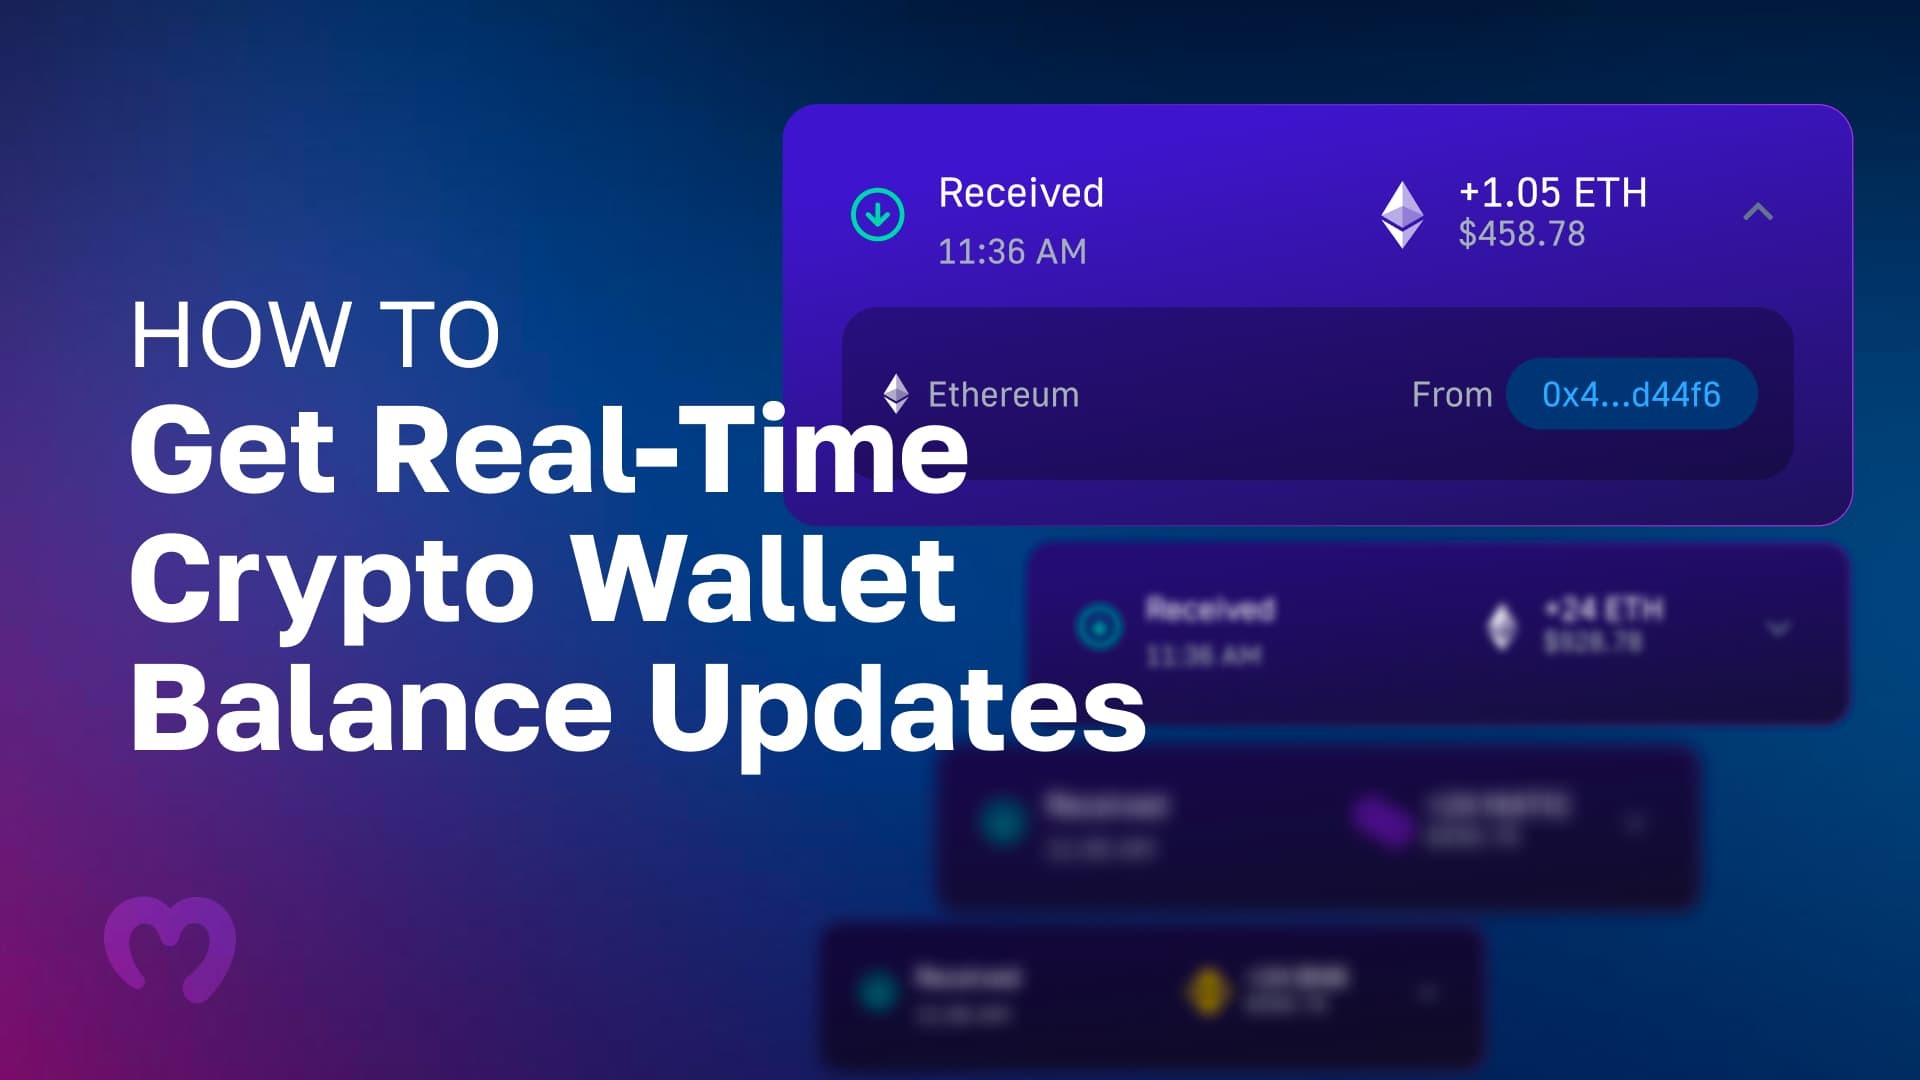 How to Get Real-Time Crypto Wallet Balance Updates